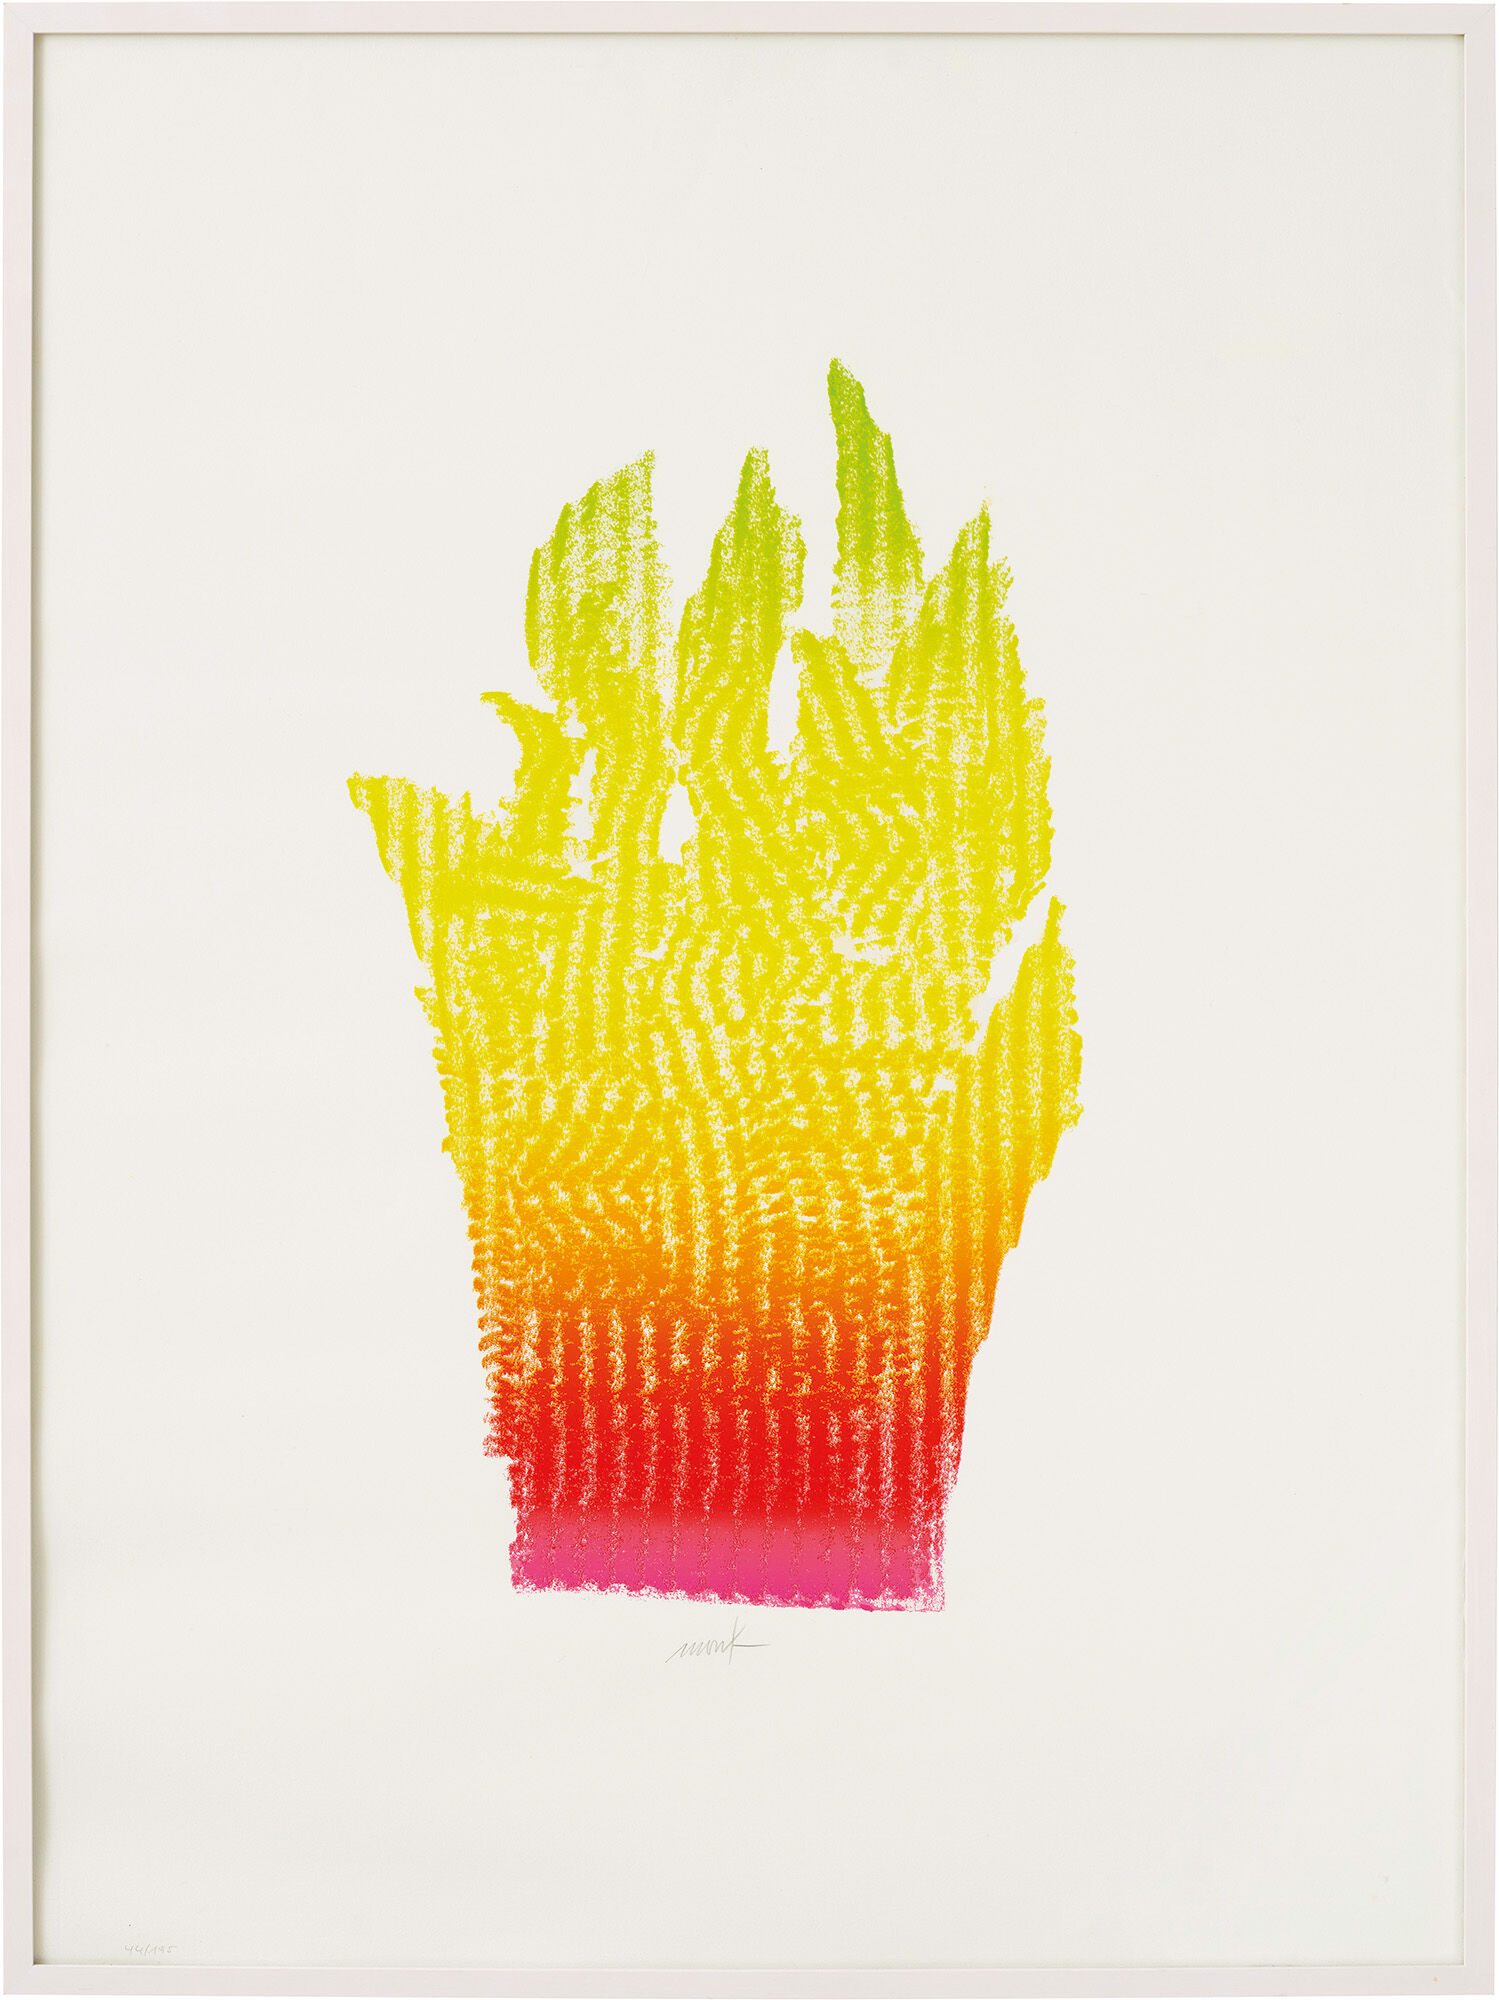 Picture "Flaming Hand" (1950) by Heinz Mack